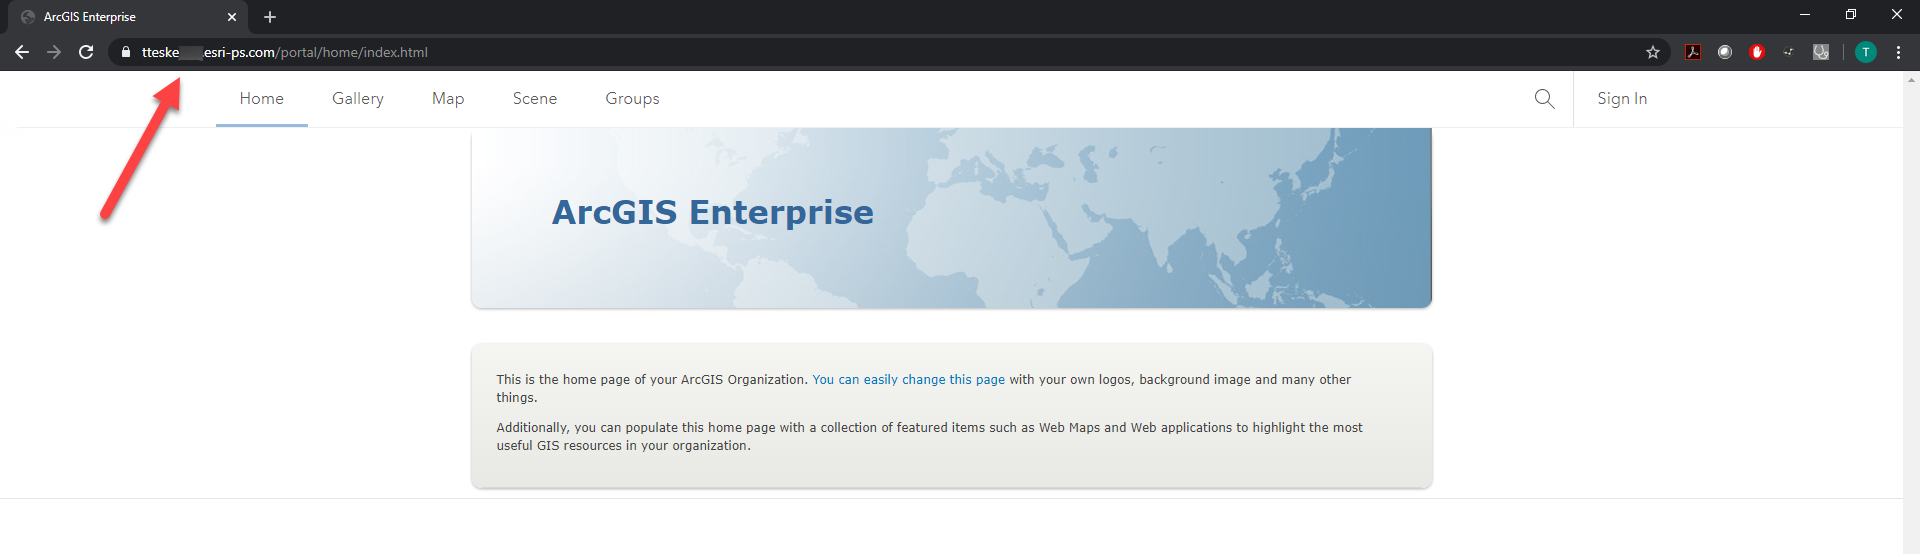 ArcGIS Portal homepage with arrow pointing to URL